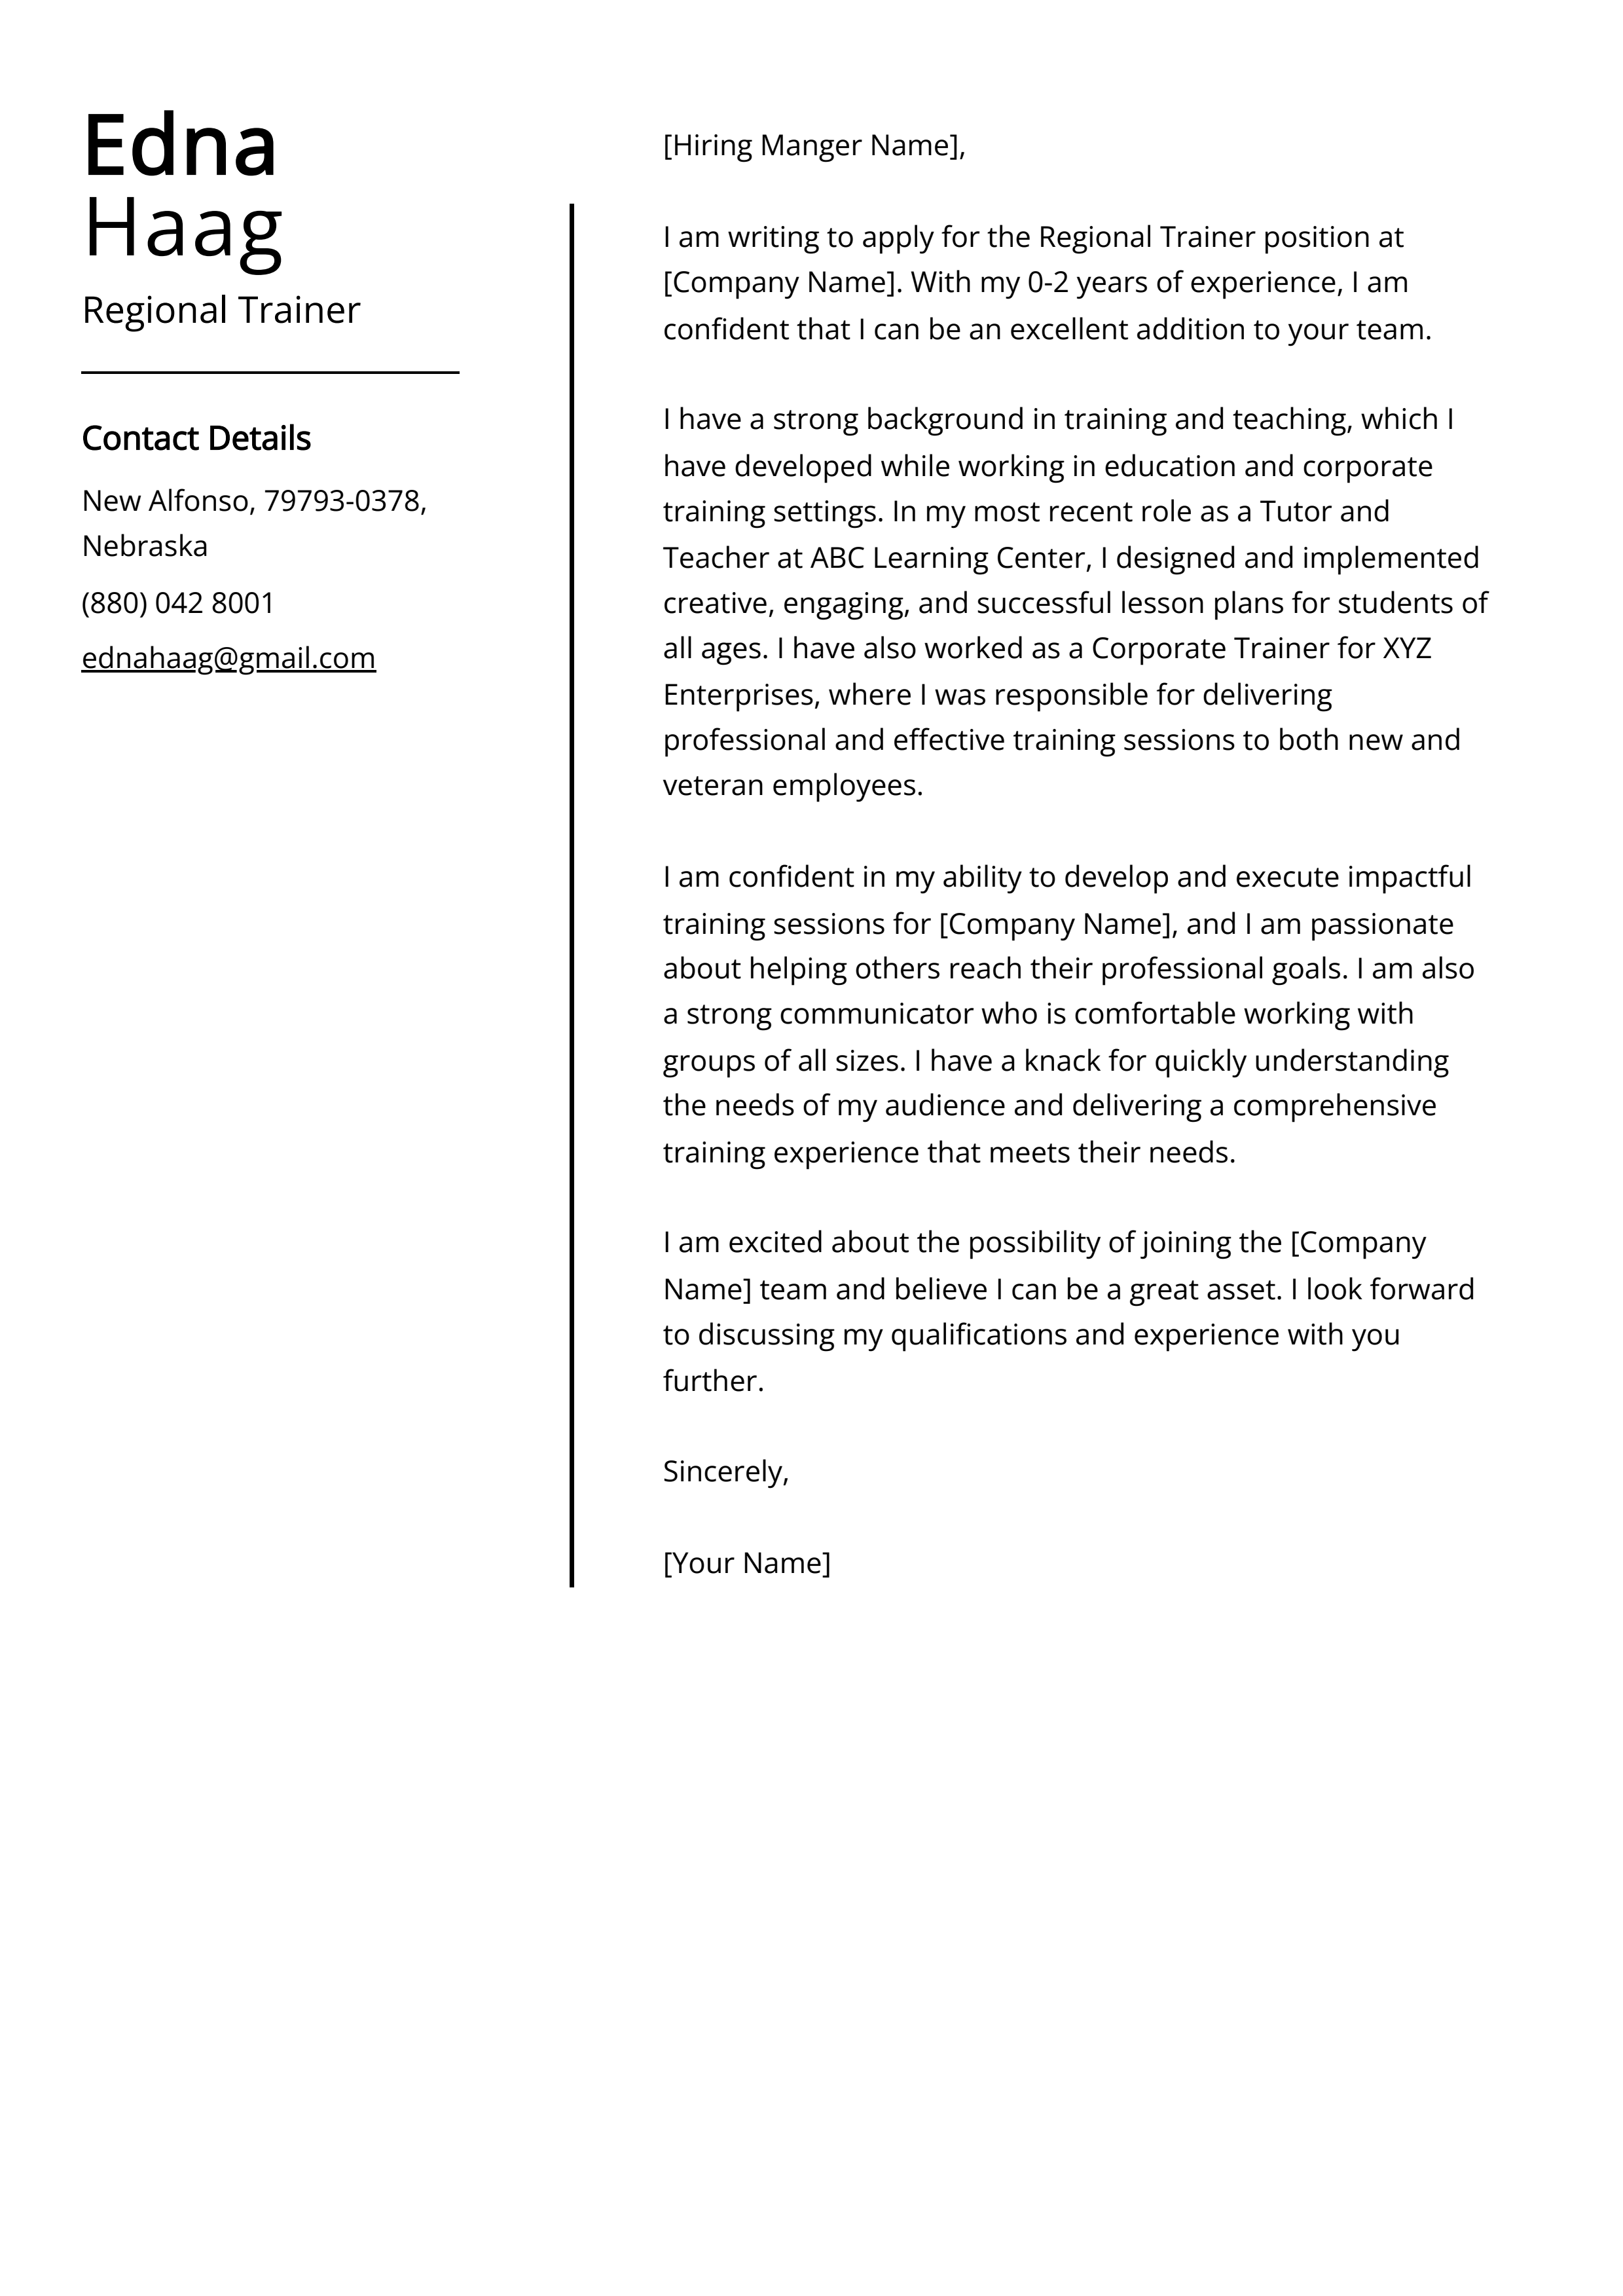 Regional Trainer Cover Letter Example